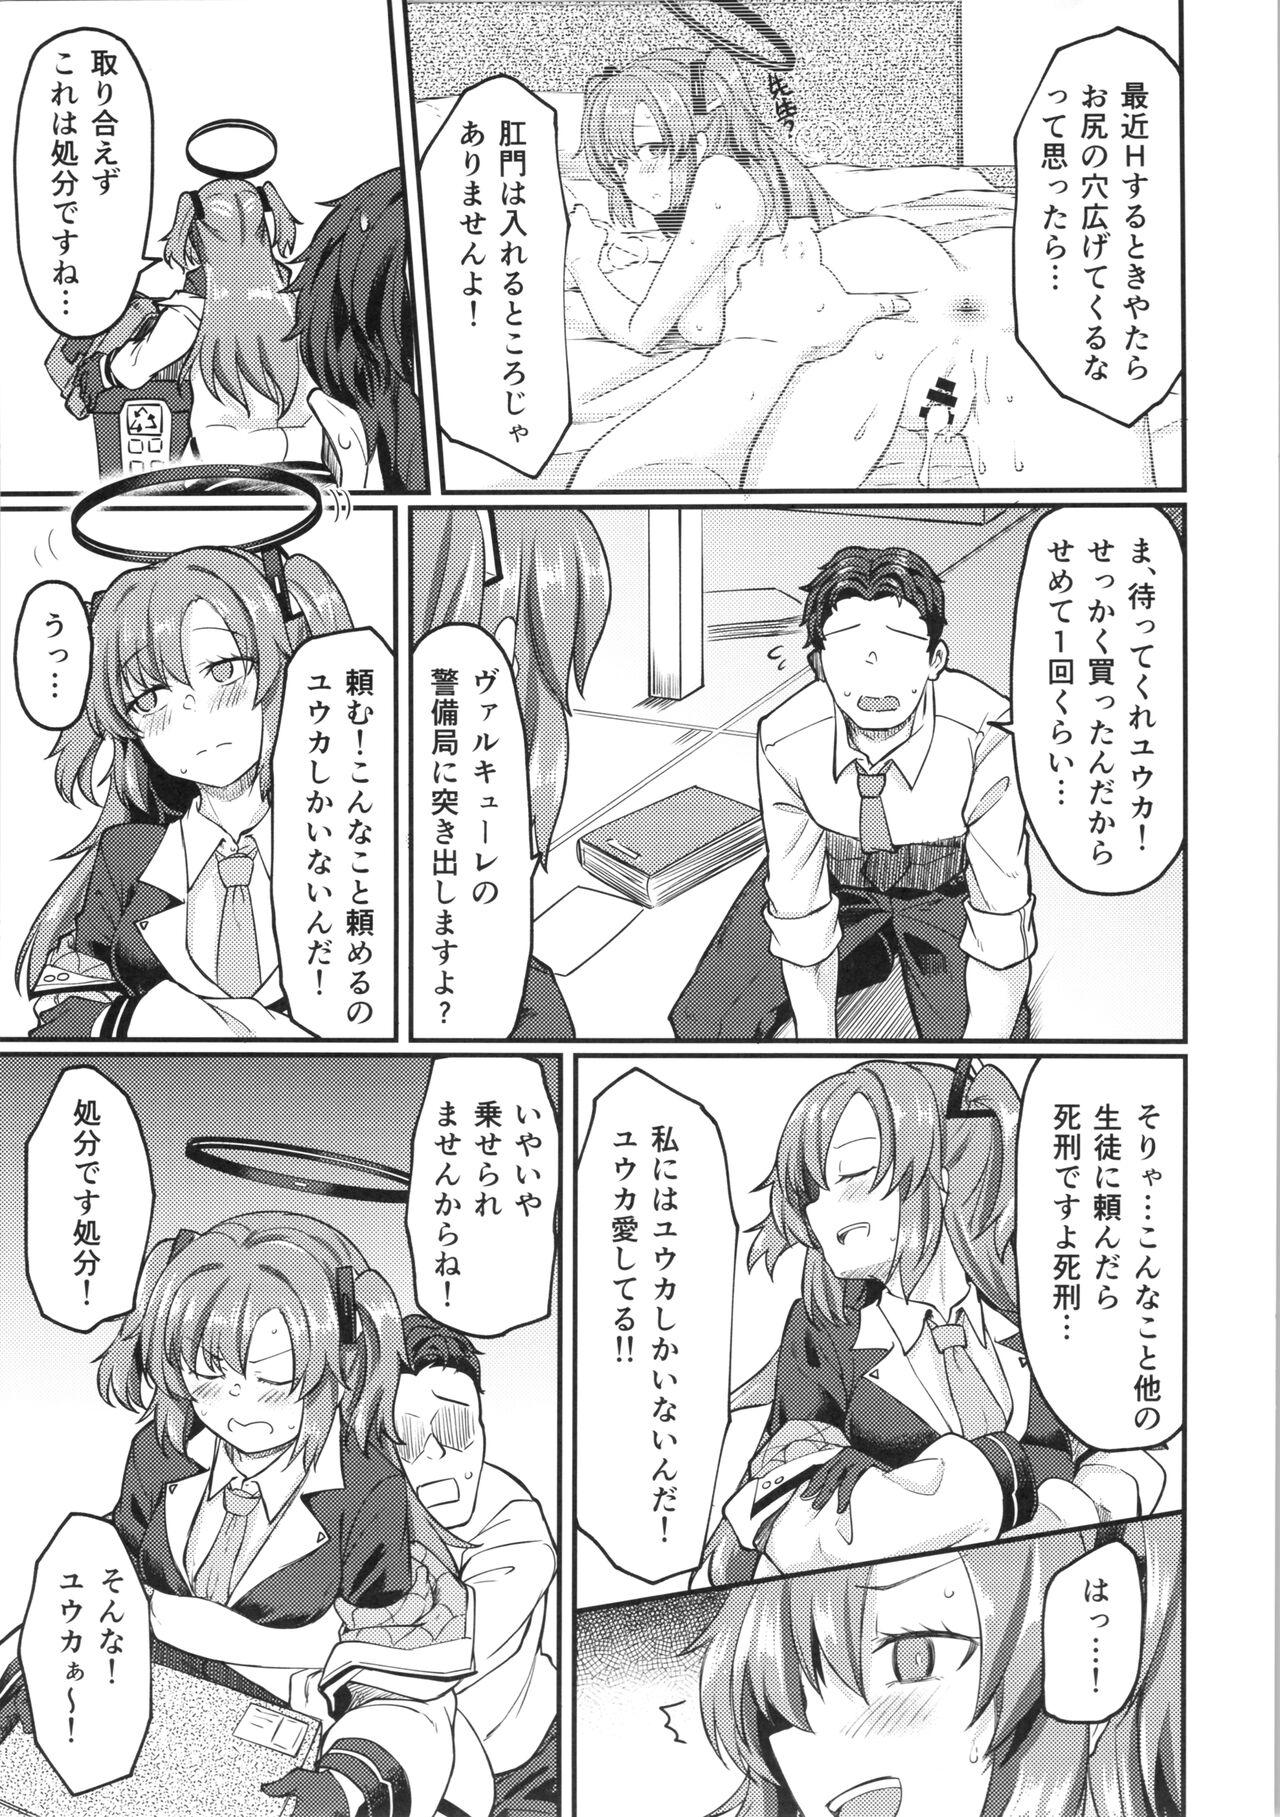 Prostitute Blue Ana! Yuukahen - Blue archive Sharing - Page 6